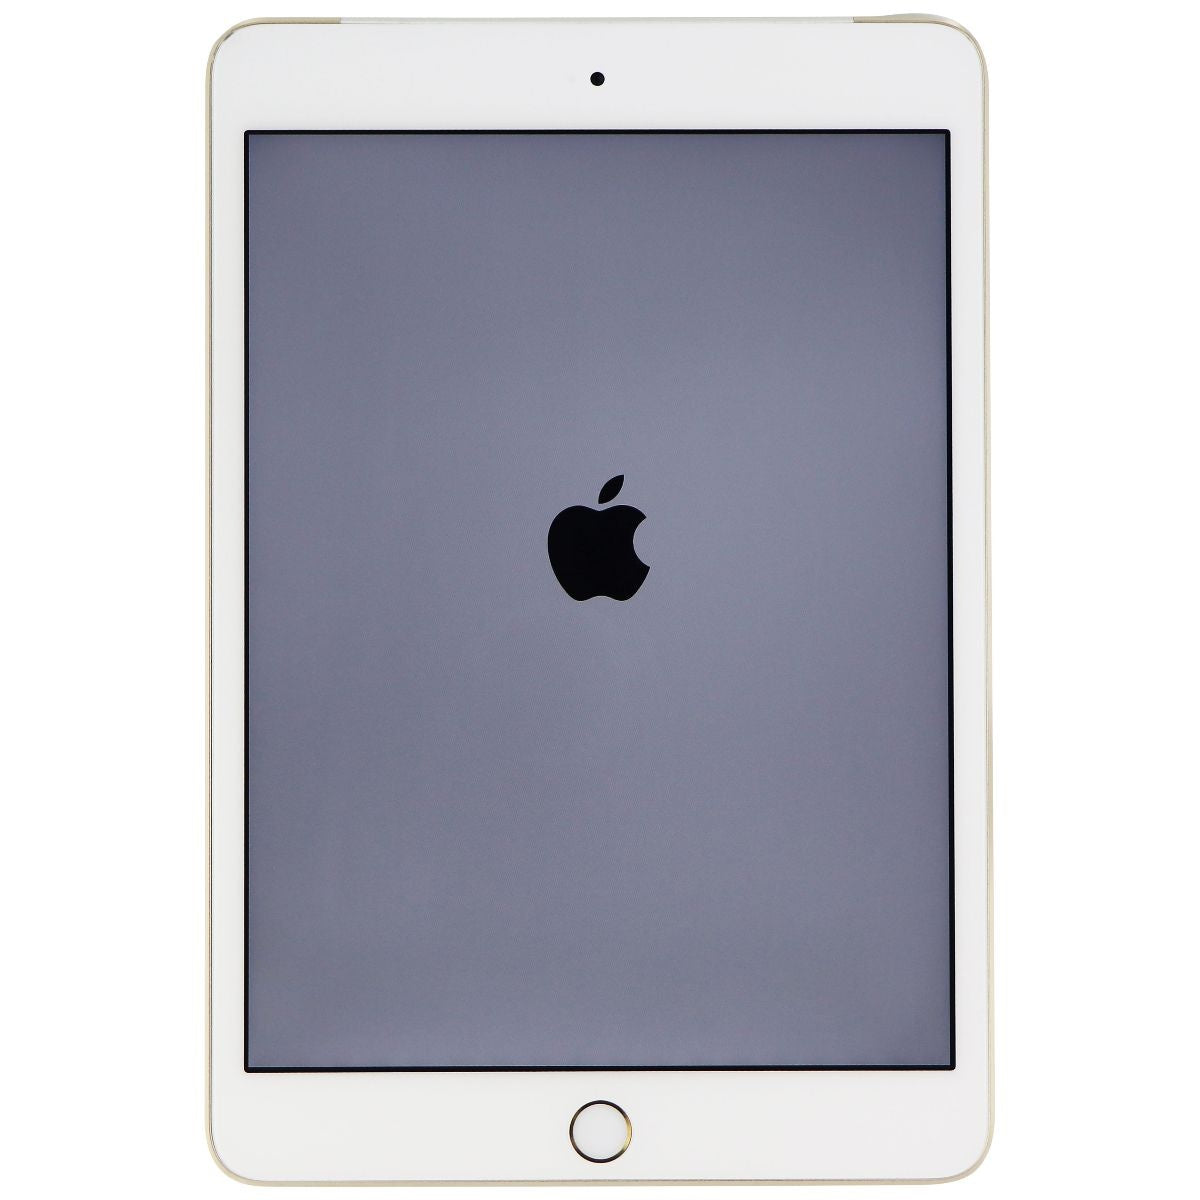 Apple iPad mini 3 (7.9-inch) Tablet (A1600) GSM + CDMA - Gold / 128GB iPads, Tablets & eBook Readers Apple    - Simple Cell Bulk Wholesale Pricing - USA Seller